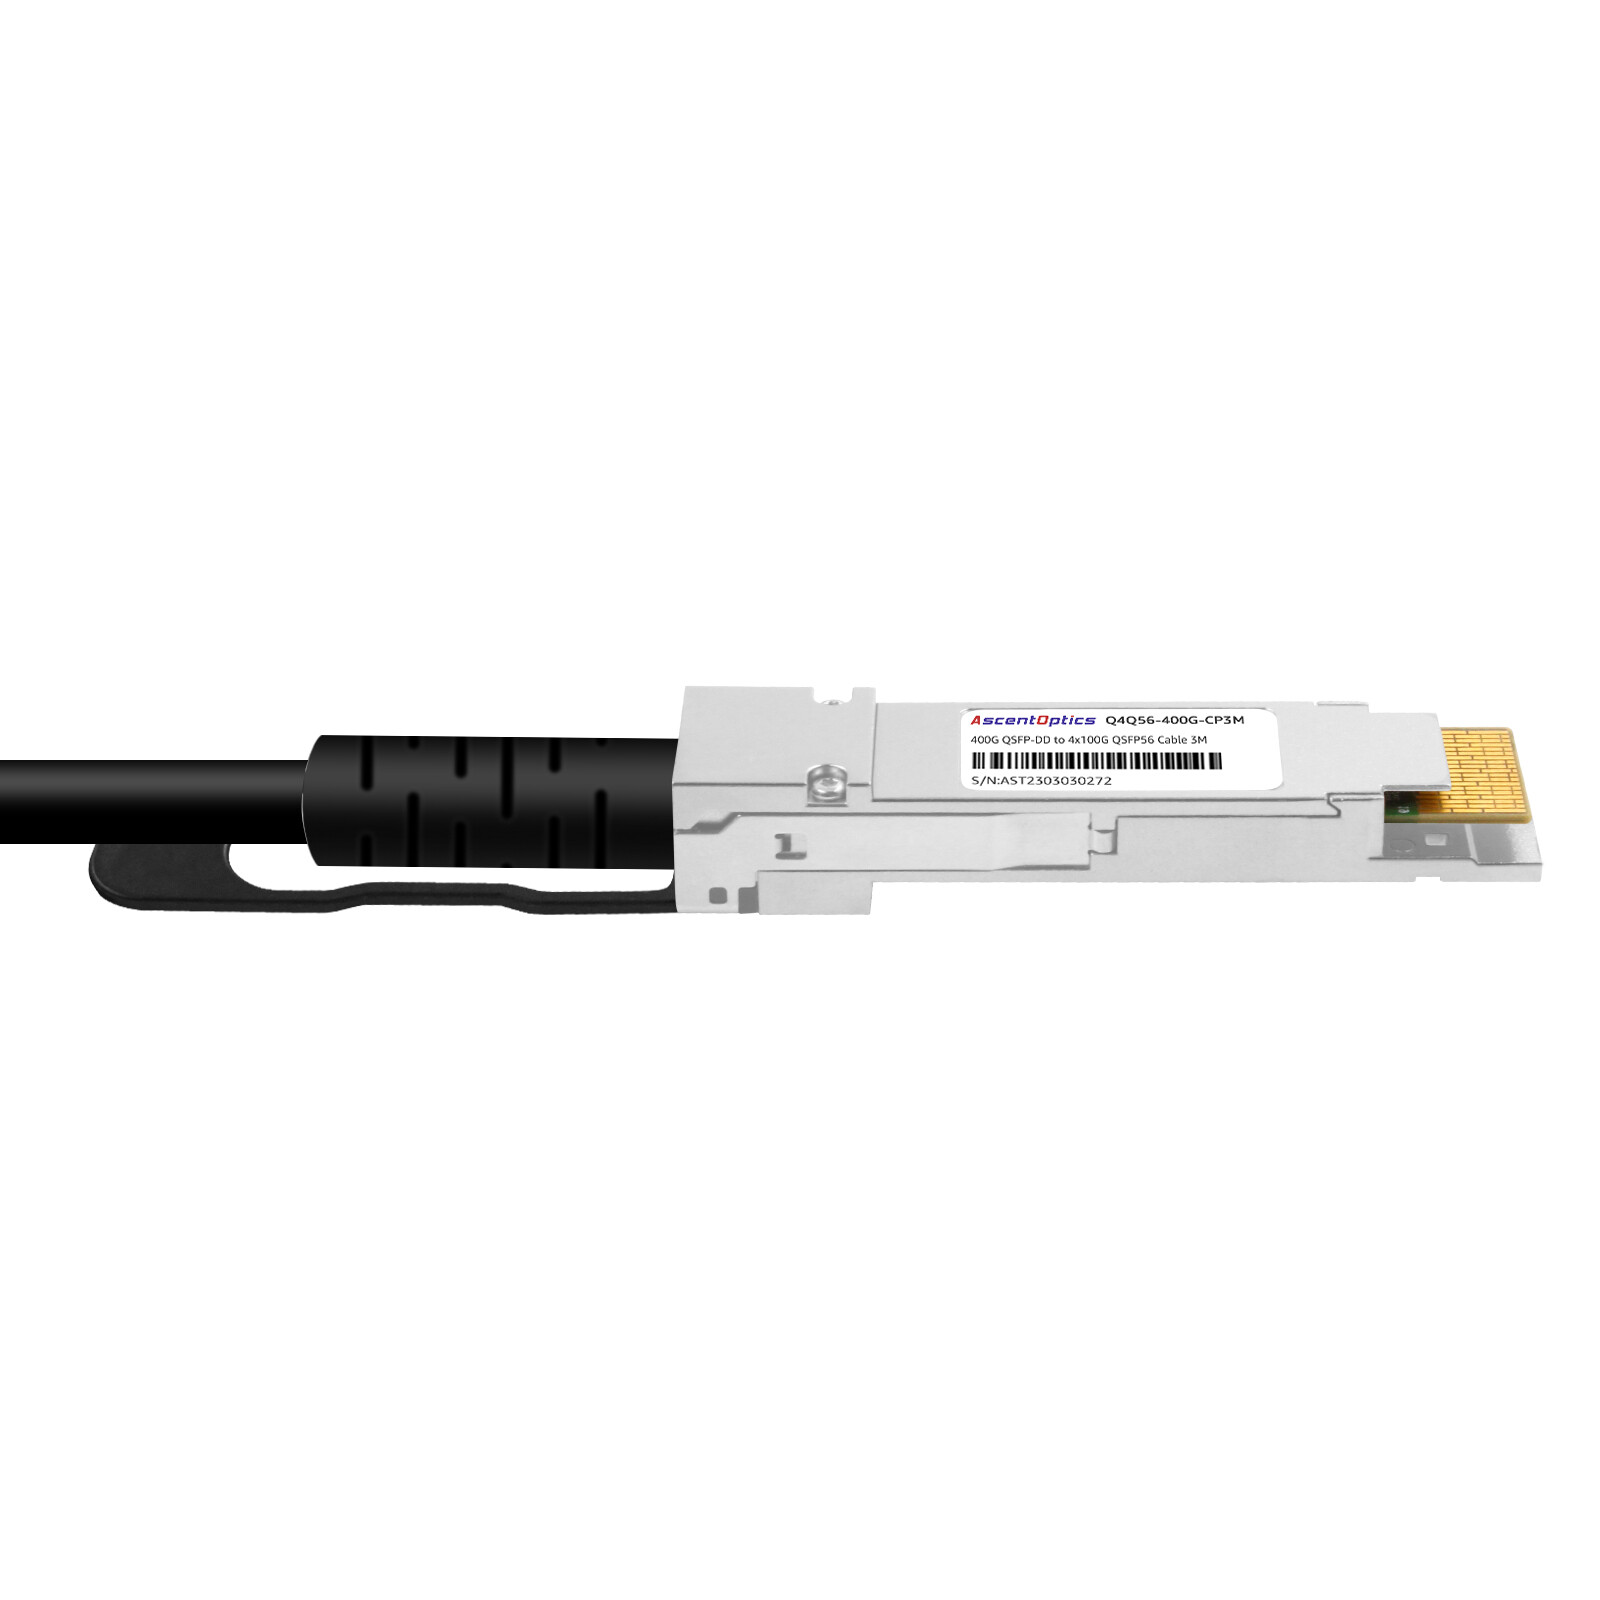 400G QSFP-DD to 4x 100G QSFP56 Copper Breakout Cable,3 Meters,Passive